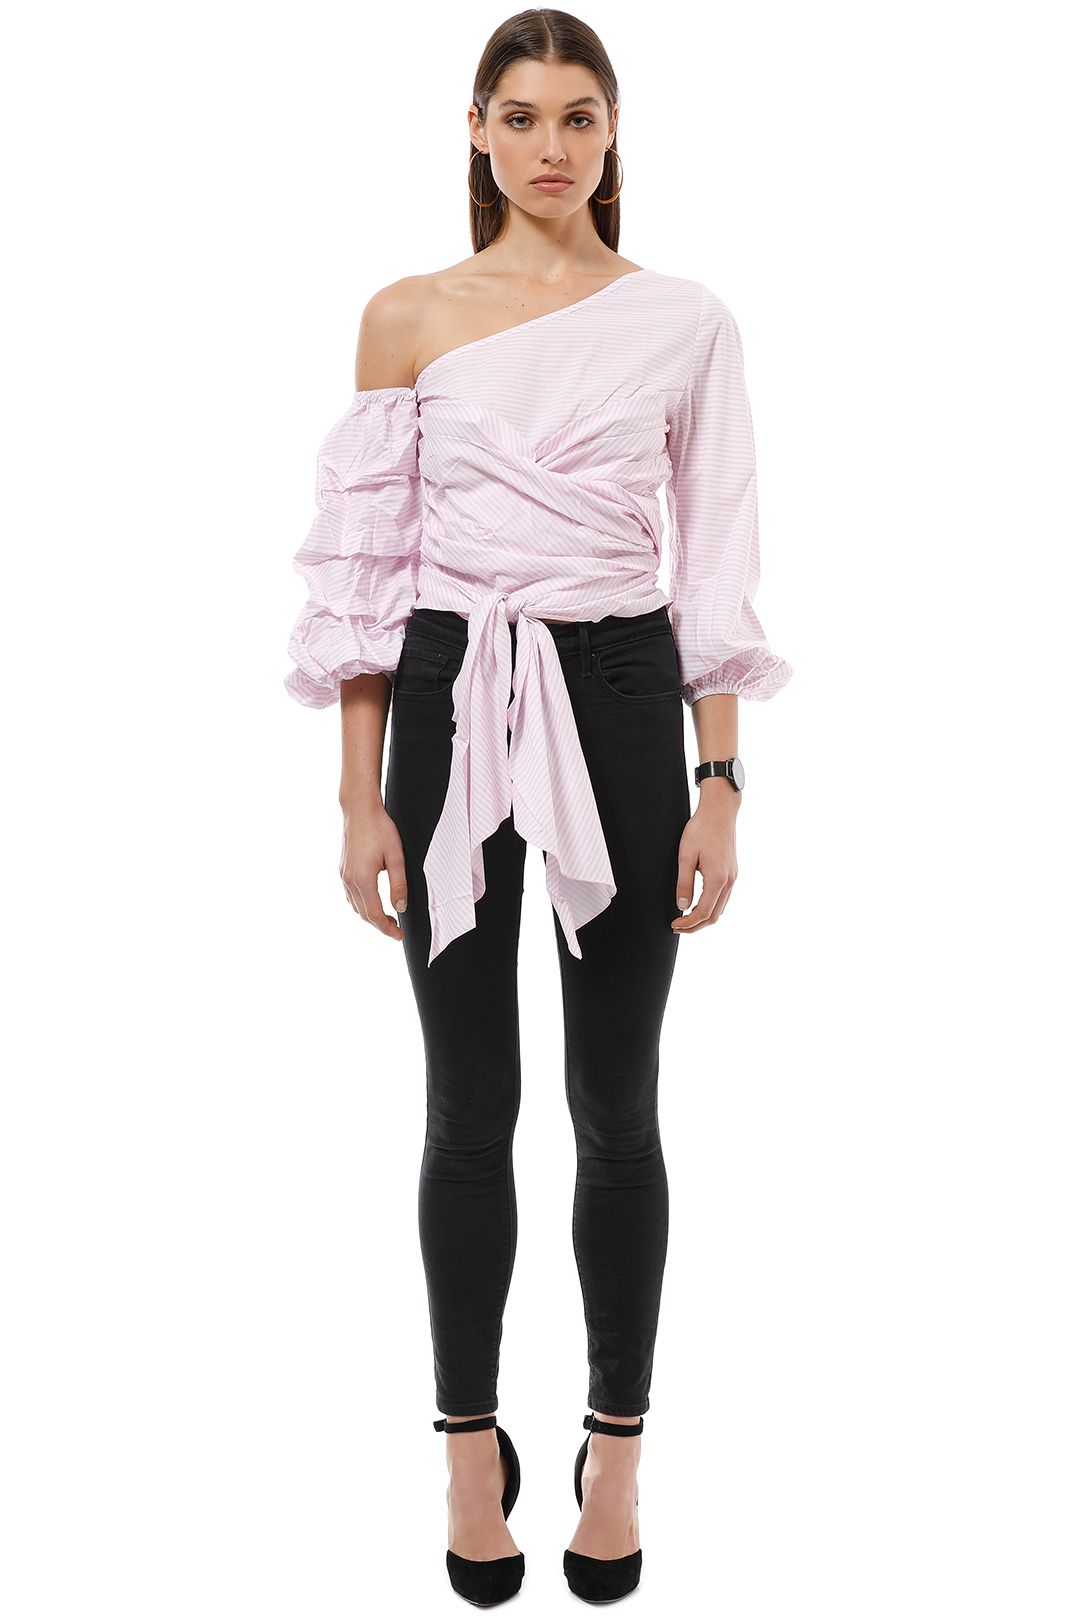 Maurie and Eve - Gabine Blouse - Pink - Front